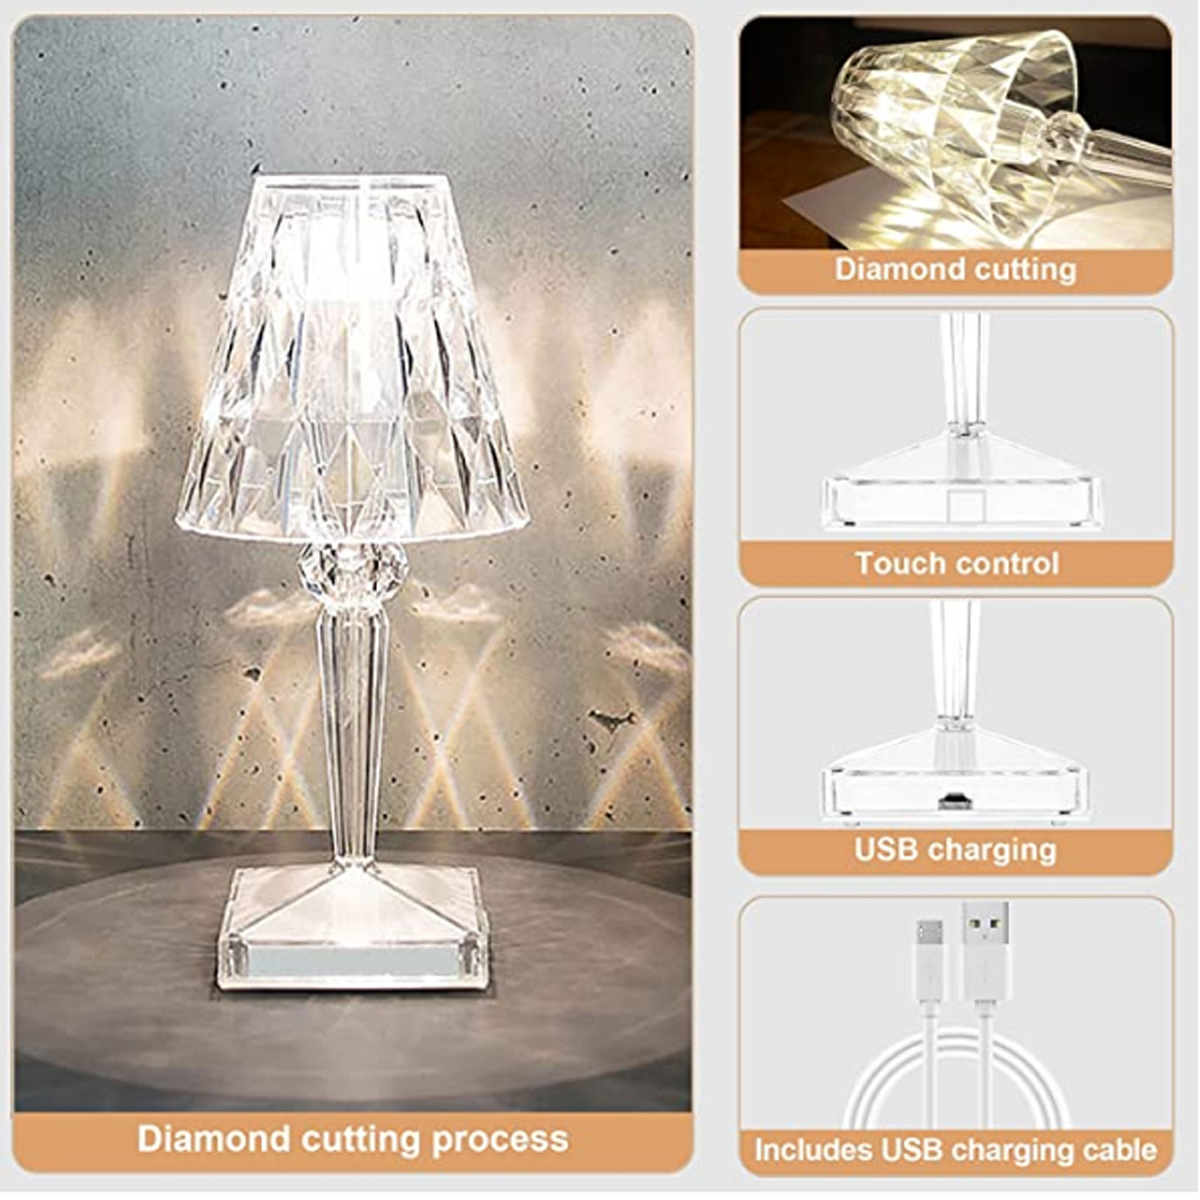 Diamond-Crystal-USB-Charging-Desk-Lamp-Acrylic-Touch-type-Stepless-Dimming-Desk-Lamp-RGB-Remote-Cont-1916731-8